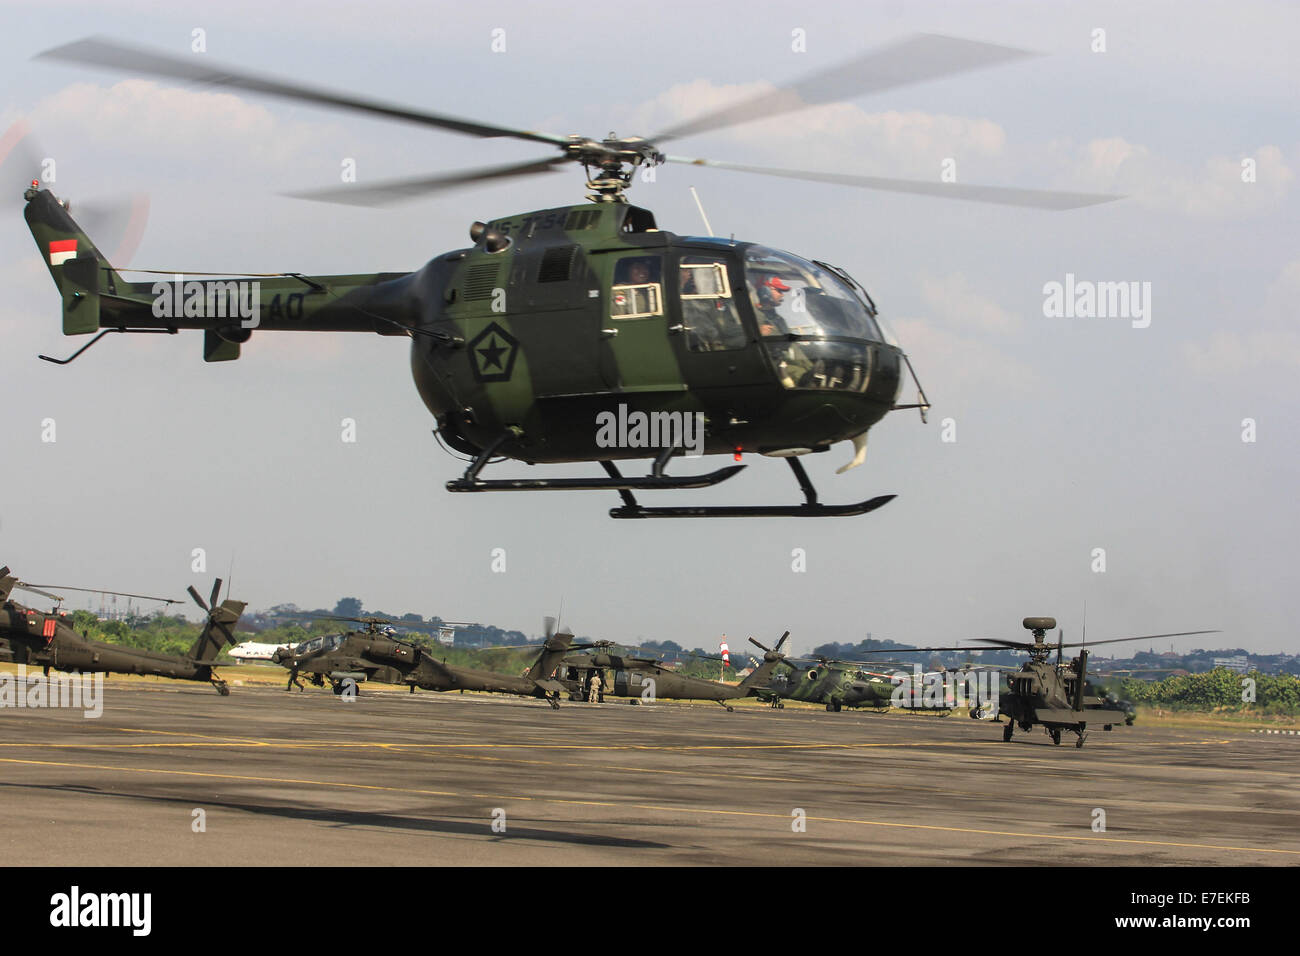 Semarang, Indonesia. 15th Sep, 2014. Military helicopters take part during the 8th Joint Exercise Garuda Shield 2014 at Army Air Base at Ahmad Yani Airport in Semarang, Central Java, Indonesia. Garuda Shield is the password for the joint exercise conducted by the Indonesian Army and the US Army and took place from 01 September to 29 September 2014 in Semarang and Asembagus, Situbondo, Indonesia. Credit:  WF Sihardian /Pacific Press/Alamy Live News Stock Photo